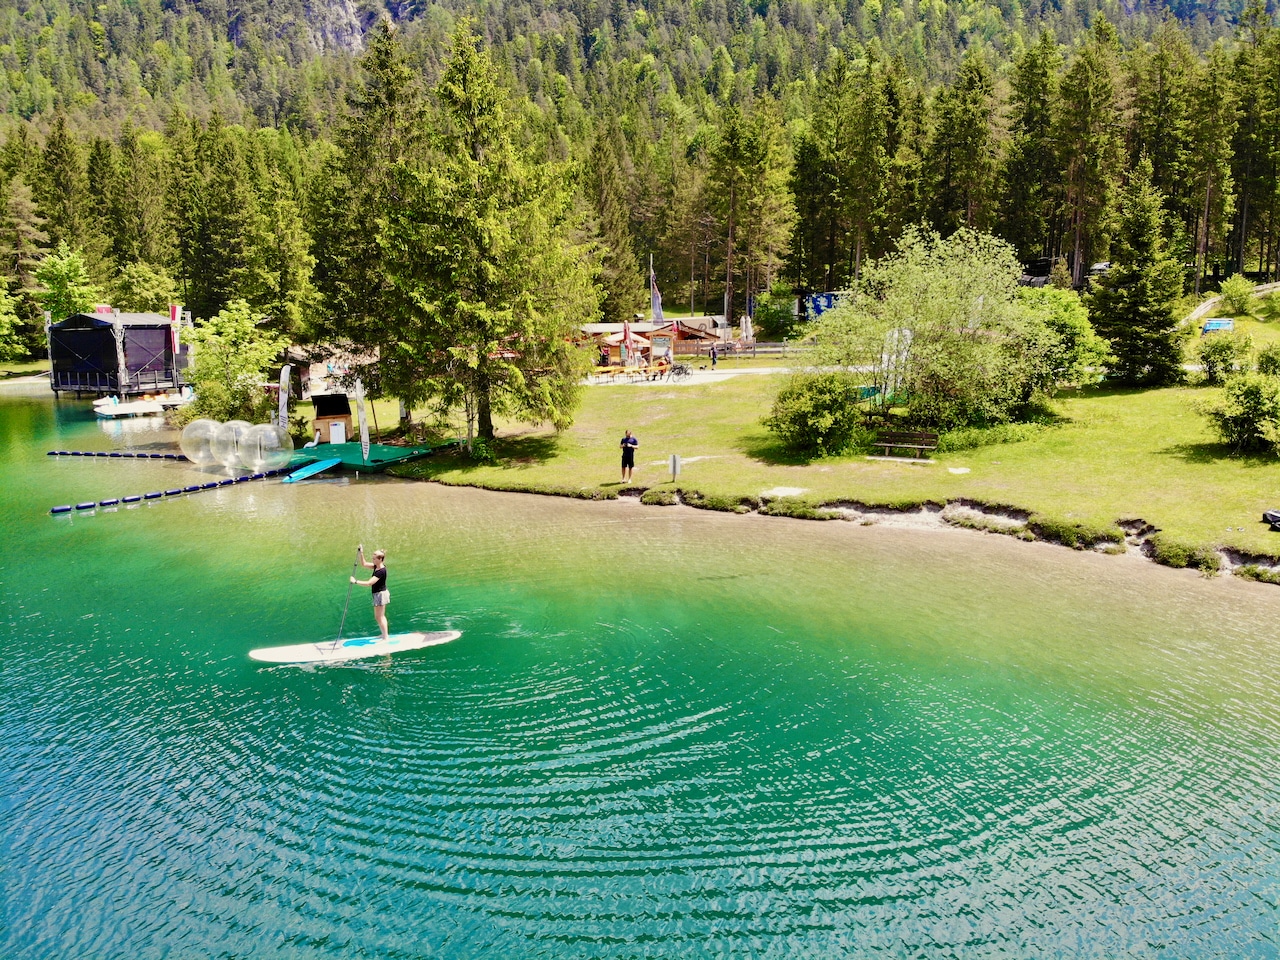 Since the Pillersee is the largest and most impressive body of water in the region, it made sense from the start to look around for SUP rentals there. SUP on the Pillersee Experience report Stand Up Paddling